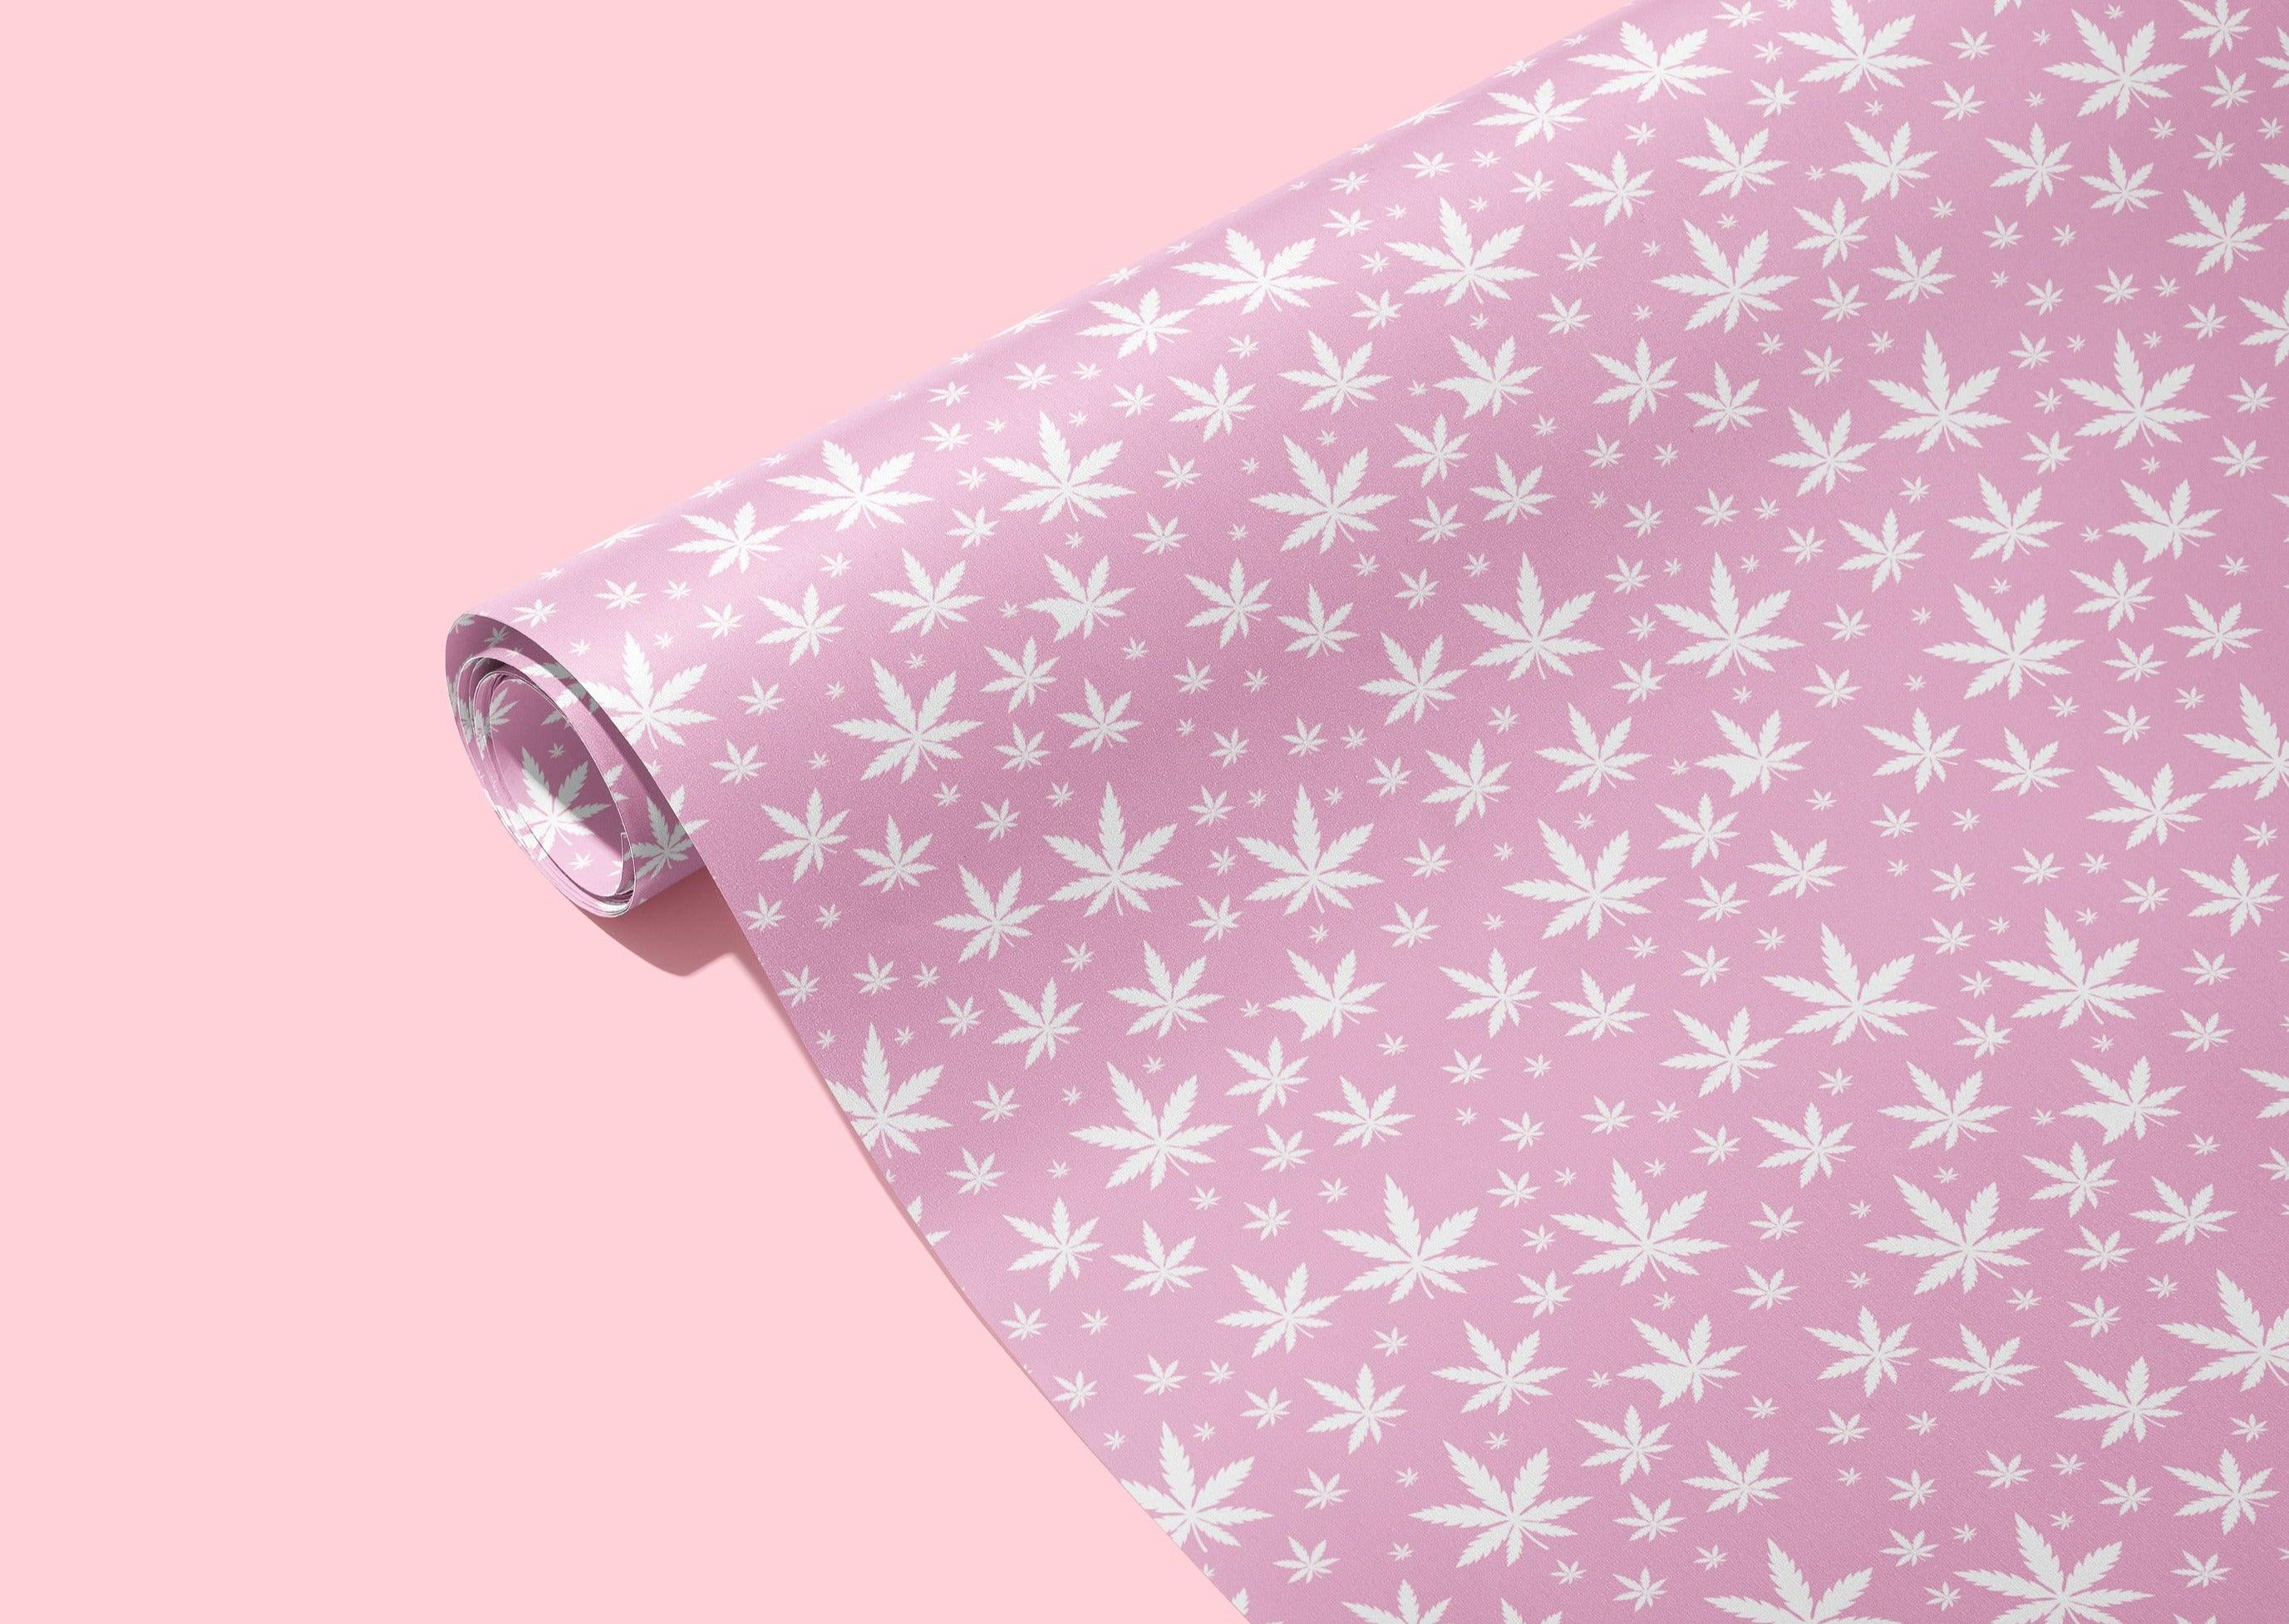 Cannabis Weed and Bong 420 Wrapping Paper Gift Wrap Holiday 19x27 Sheets 